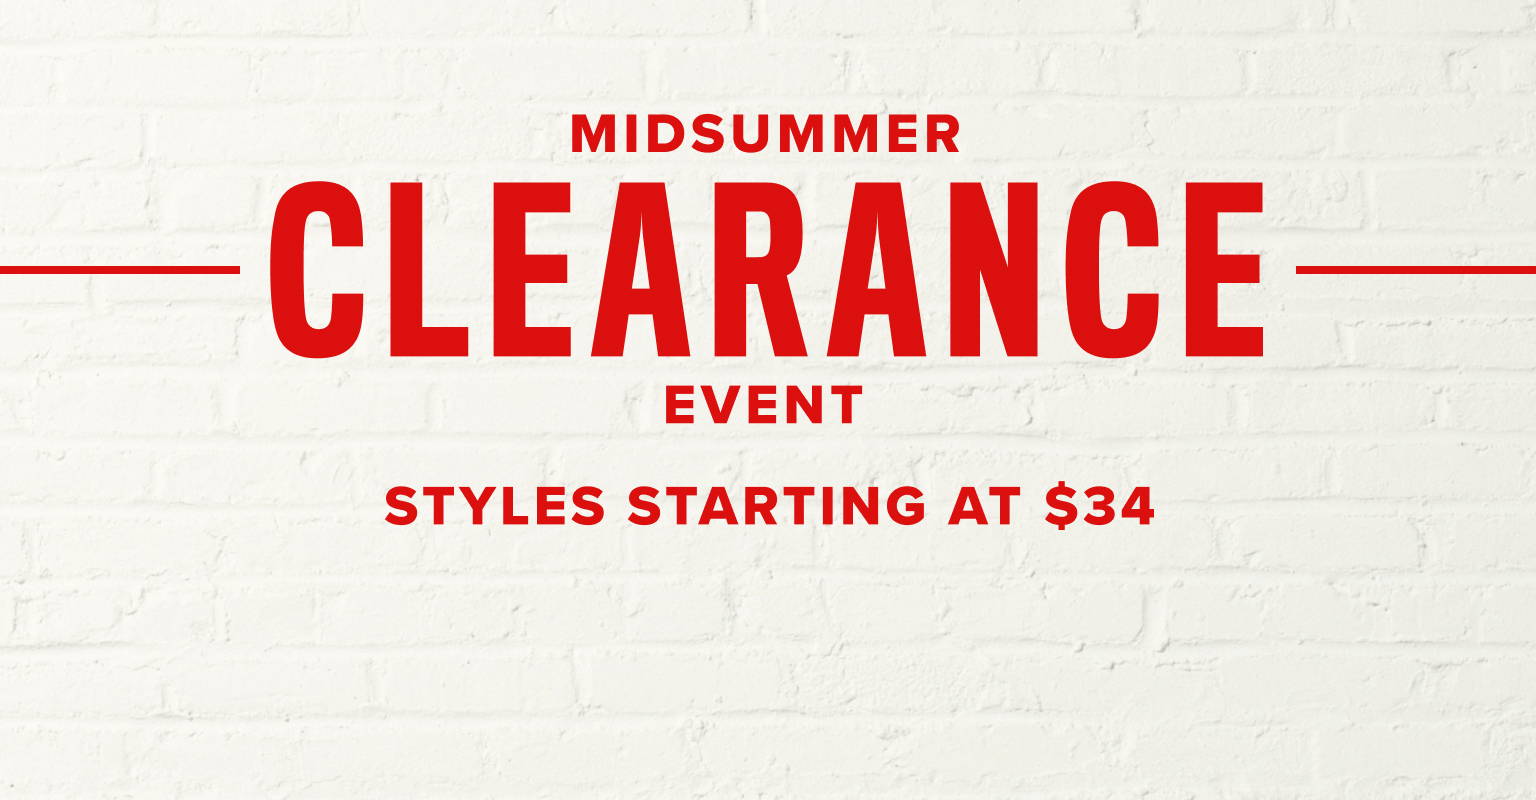 midsummer clearance event. styles starting at $34